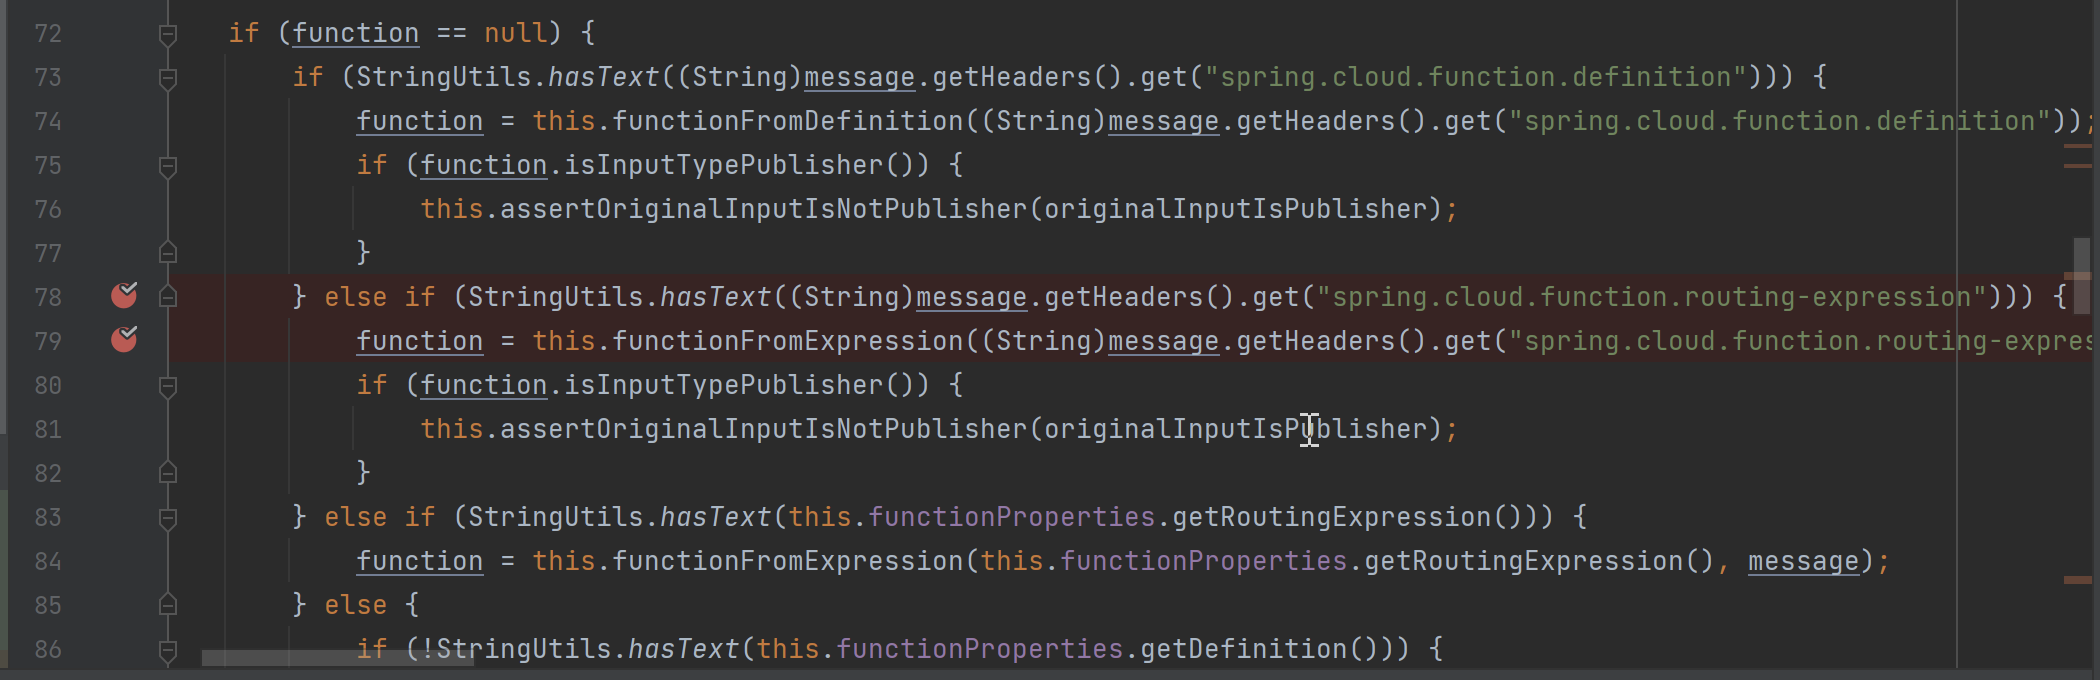 Spring_Cloud_Function_SPEL表达式注入_10.png